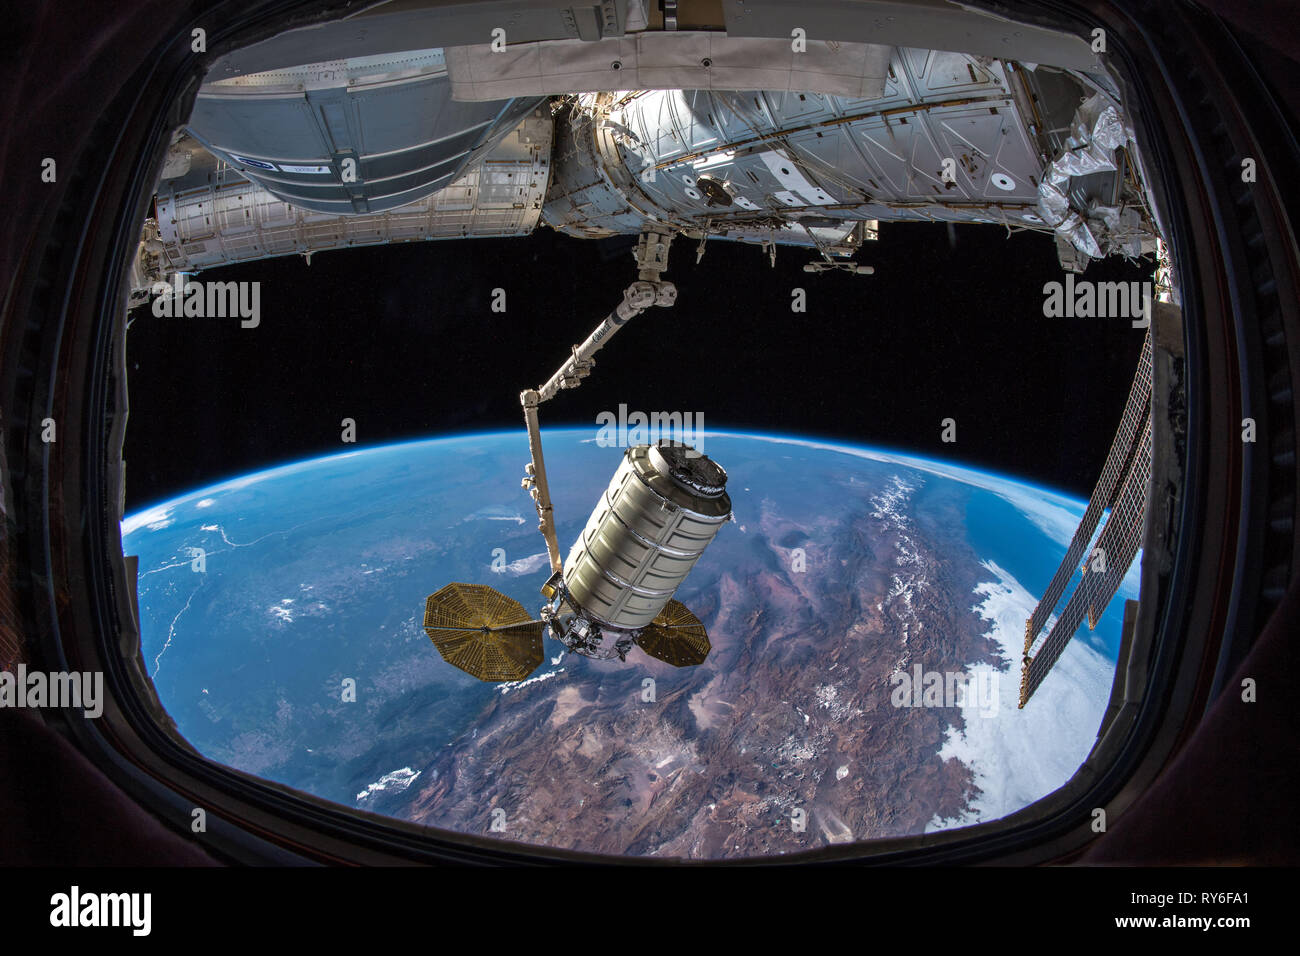 Cygnys spacecraft docked to the ISS (International Space Station), delivering research and supplies. Will depart Feb. 2019. Stock Photo